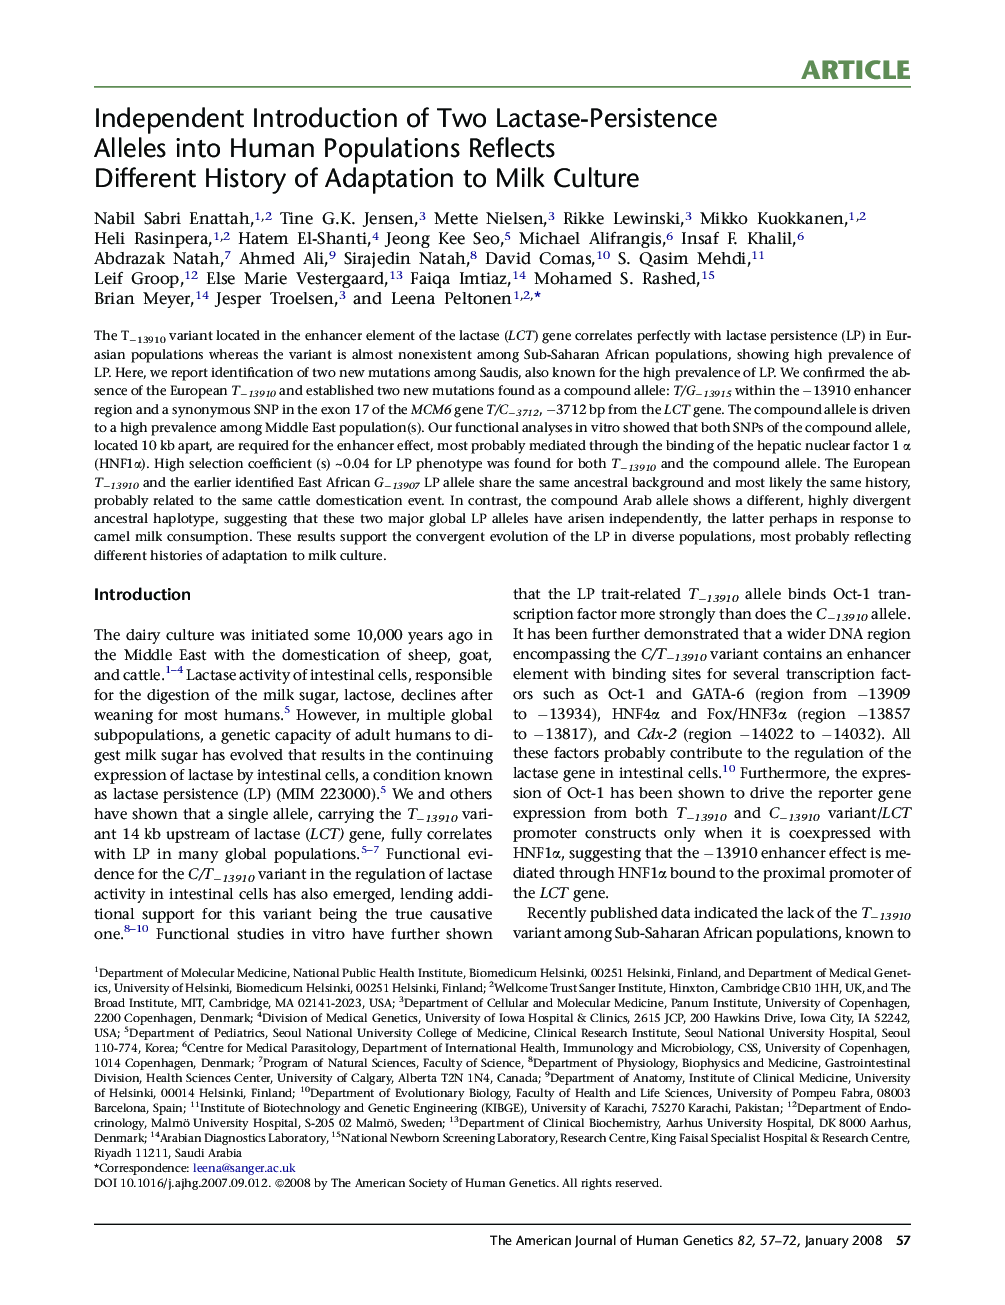 Independent Introduction of Two Lactase-Persistence Alleles into Human Populations Reflects Different History of Adaptation to Milk Culture